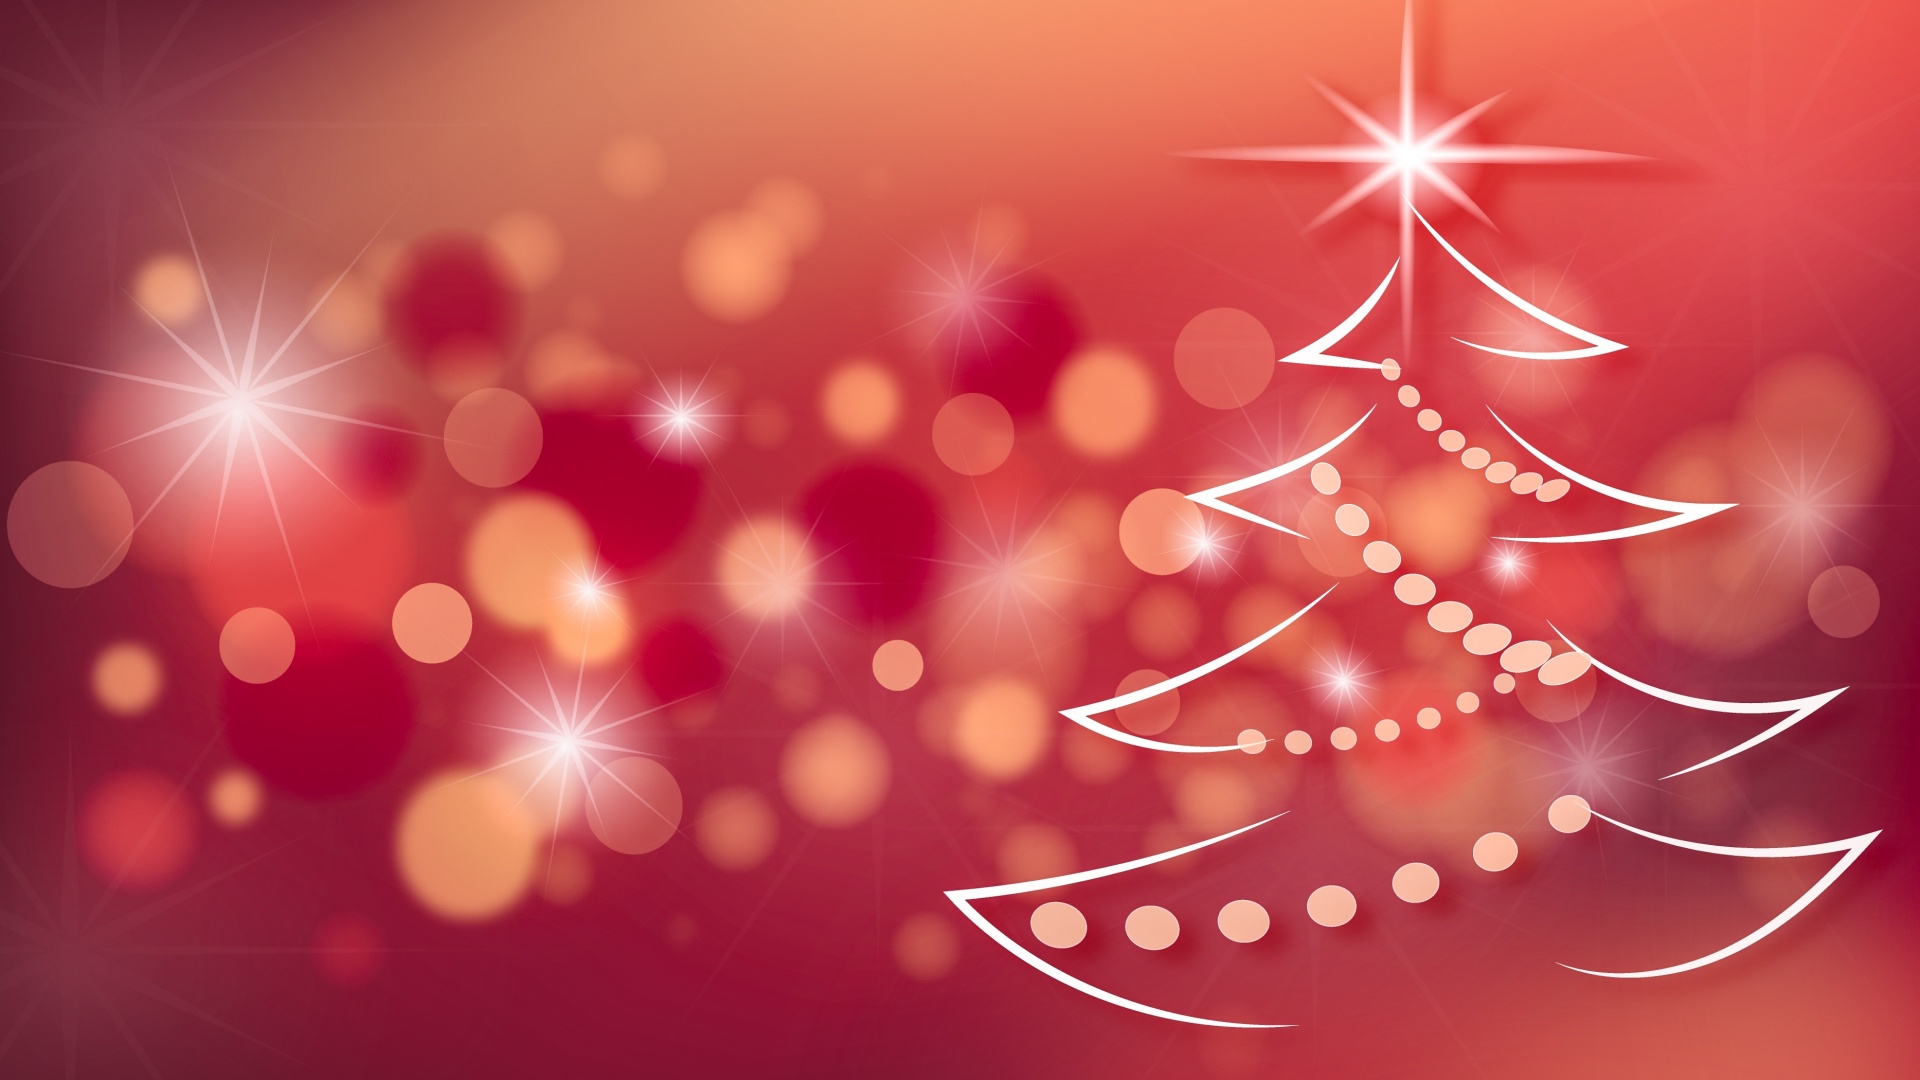 Background With Christmas Tree